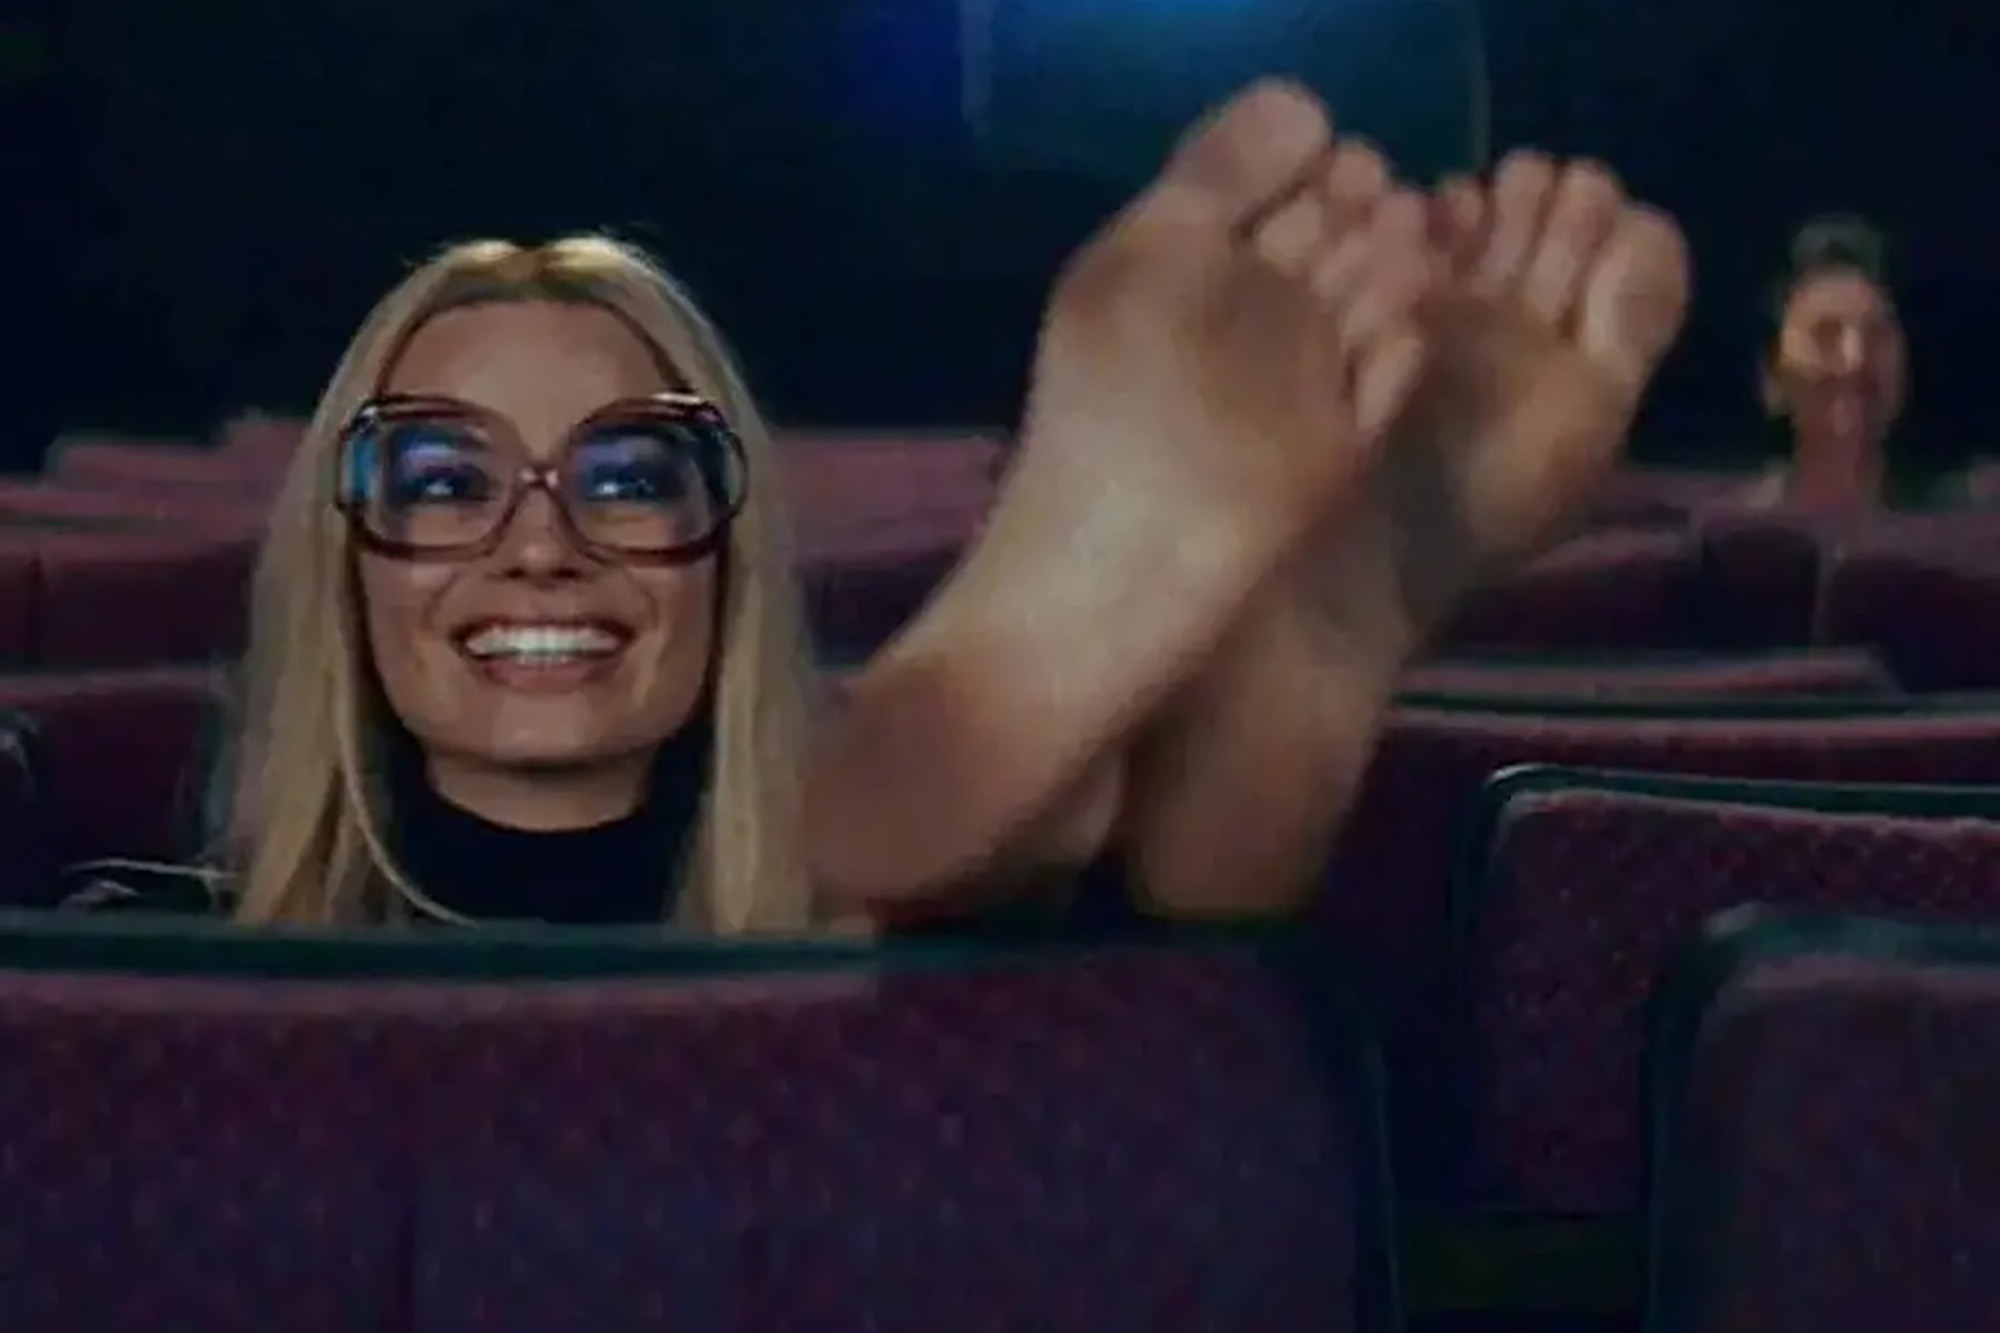 aly fox recommends margot robbie feet soles pic